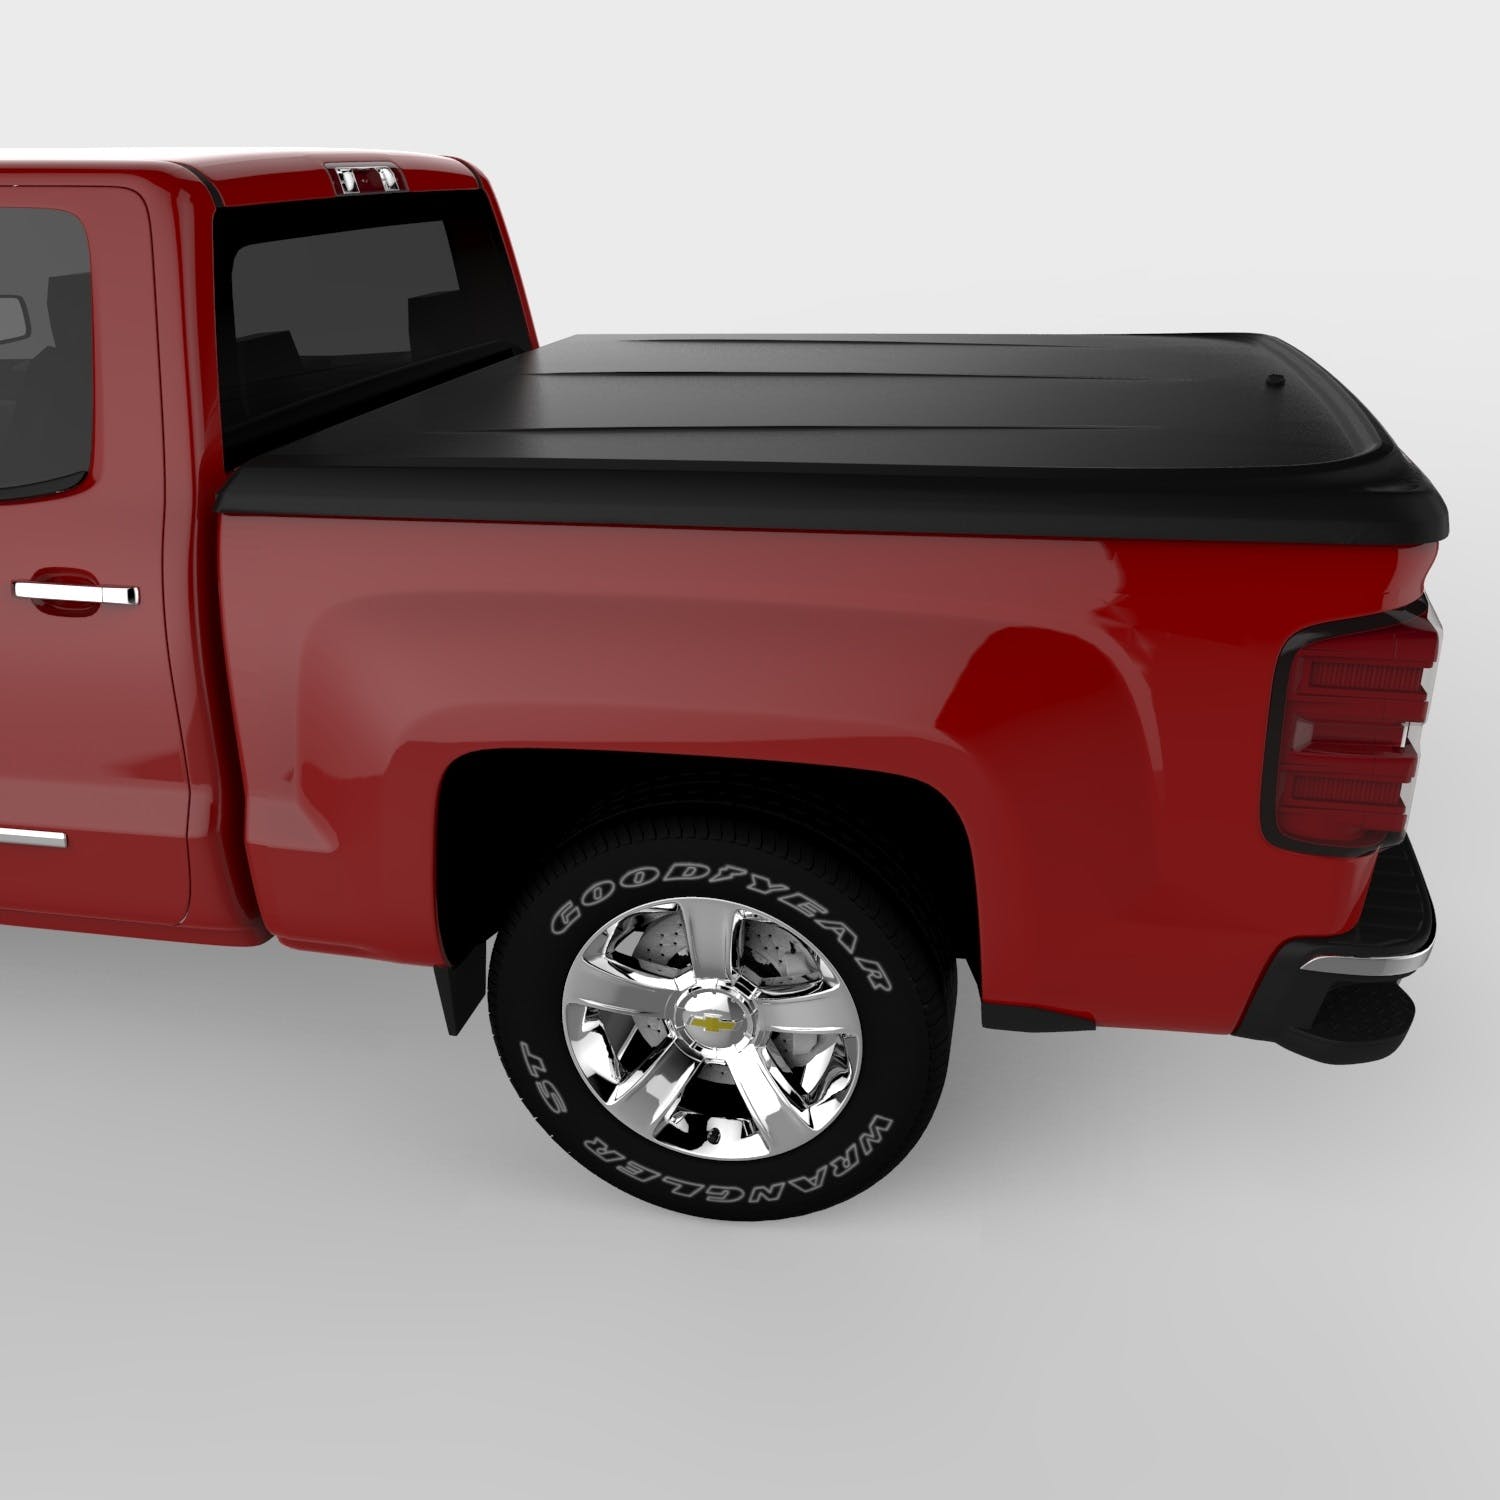 UnderCover UC1116L-G7C LUX Tonneau Cover, Pull Me Over Red